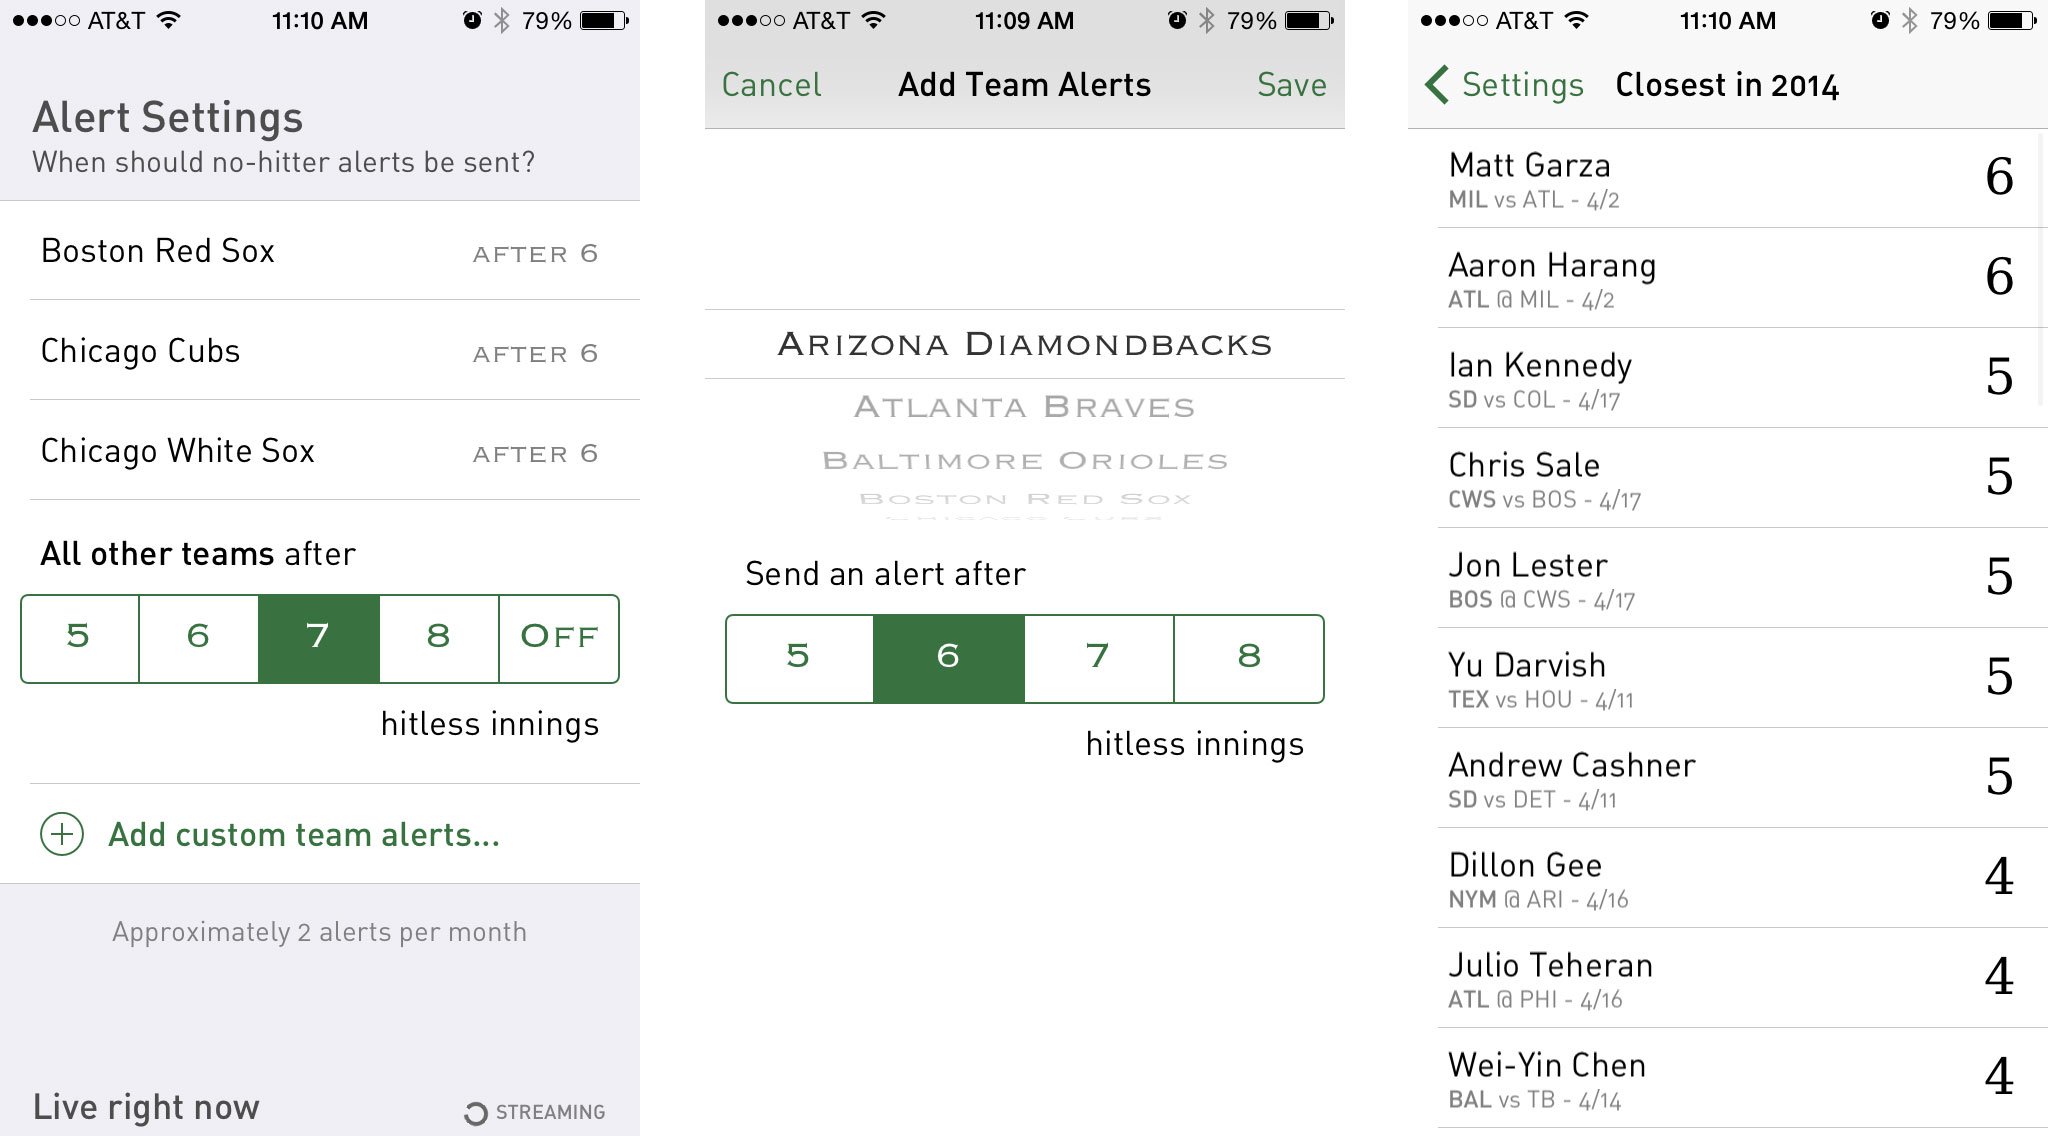 Best iPhone apps to follow the 2014 baseball season: No-Hitter Alerts